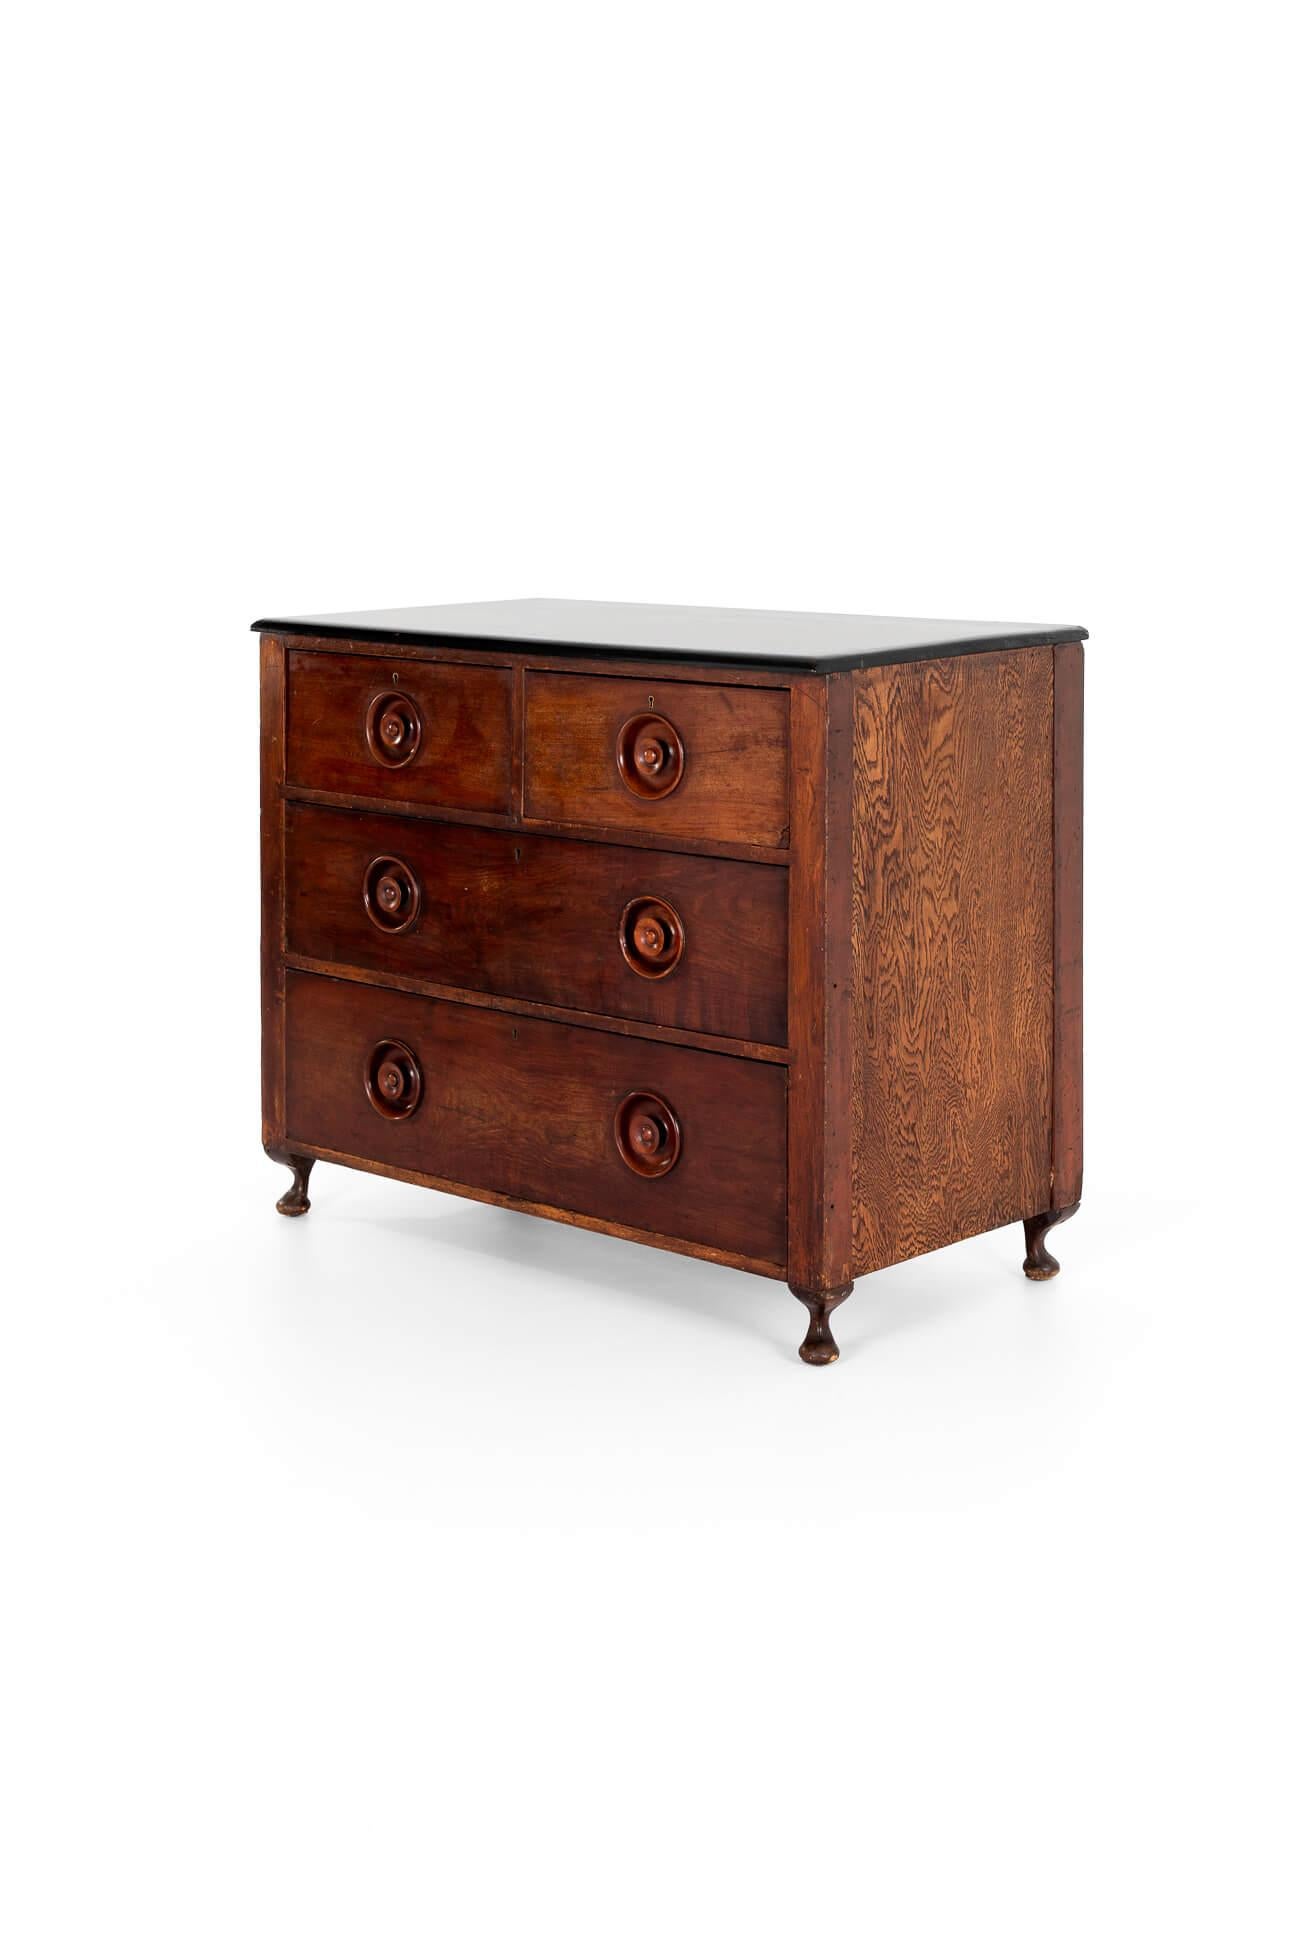 A Victorian pharmacy chest in pine, with mahogany fronted drawers.

The chest has a thick ebonised top, leading to two short over two long graduating drawers, raised on cabriole legs.

Each draw has turned recessed handles with brass